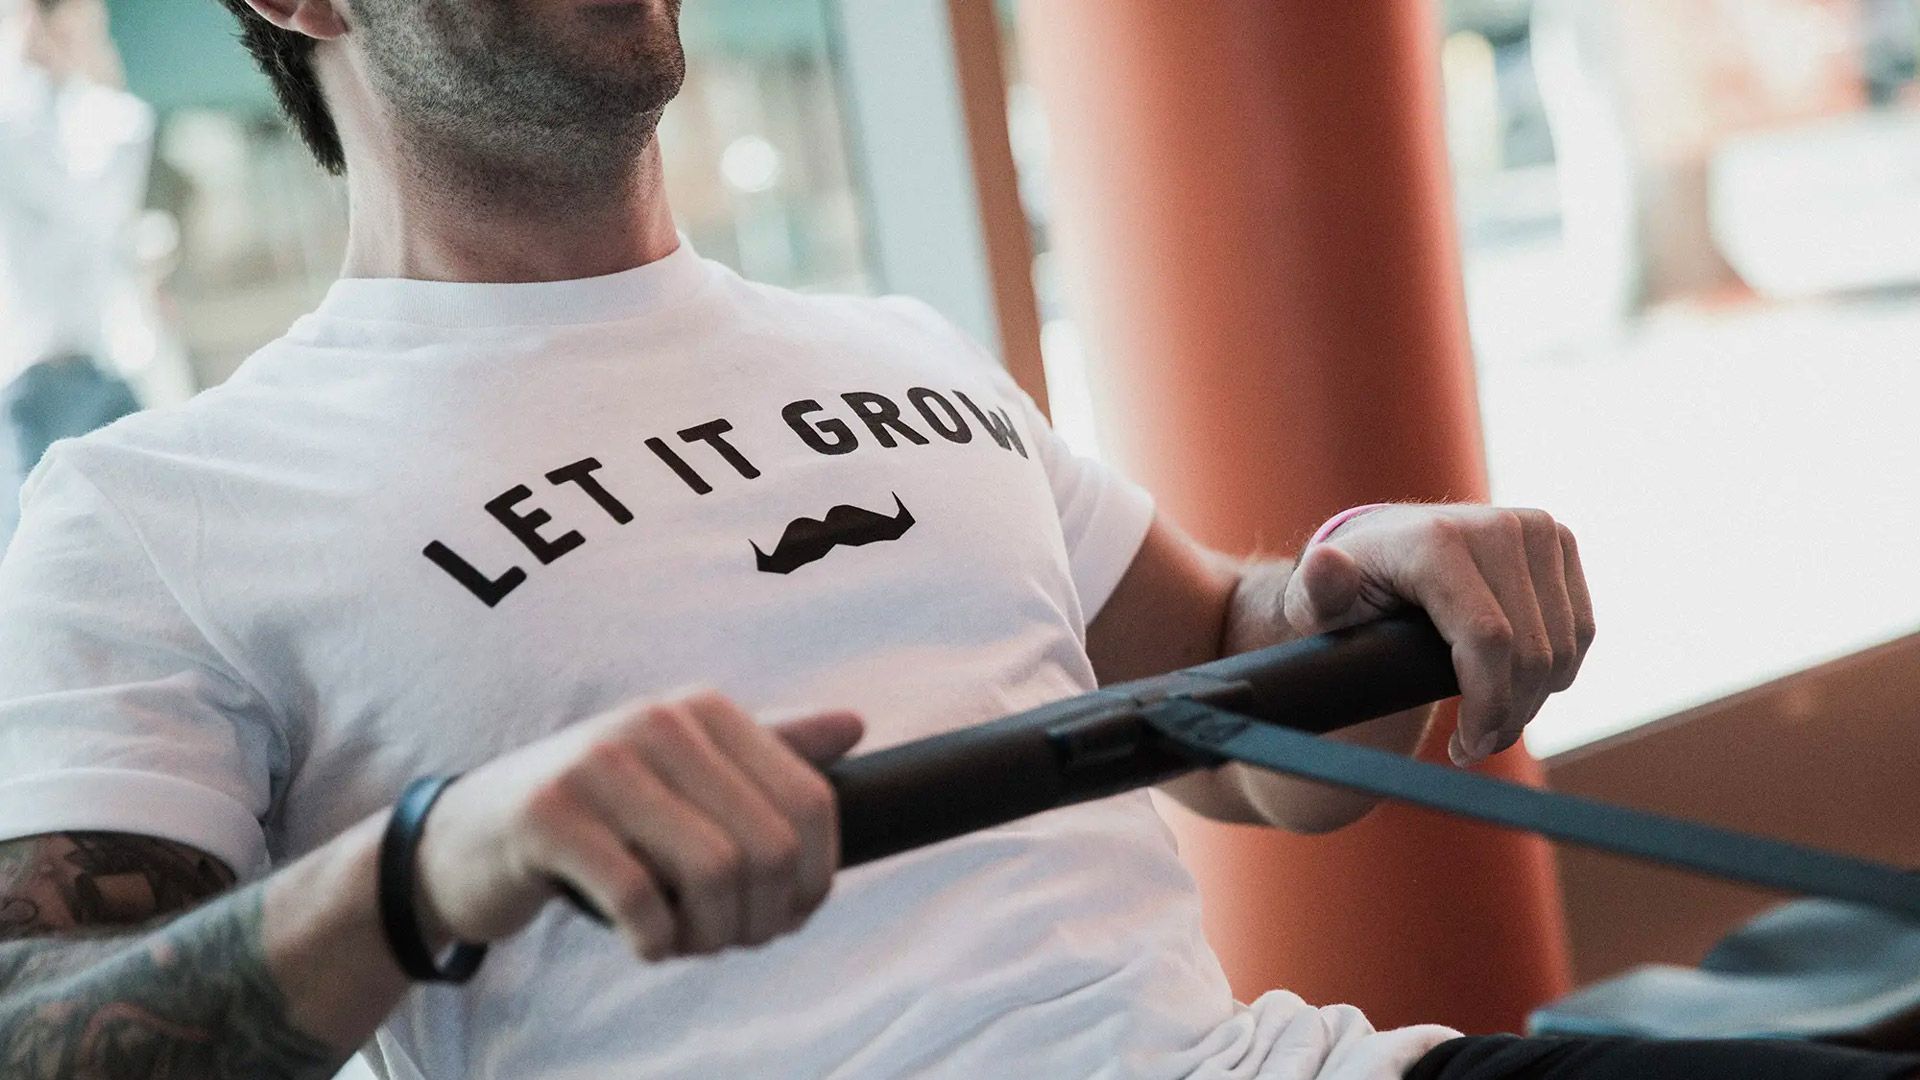 Photo of a man on a rowing machine wearing a t-shirt with the Movember logo and text which says "Let it grow"